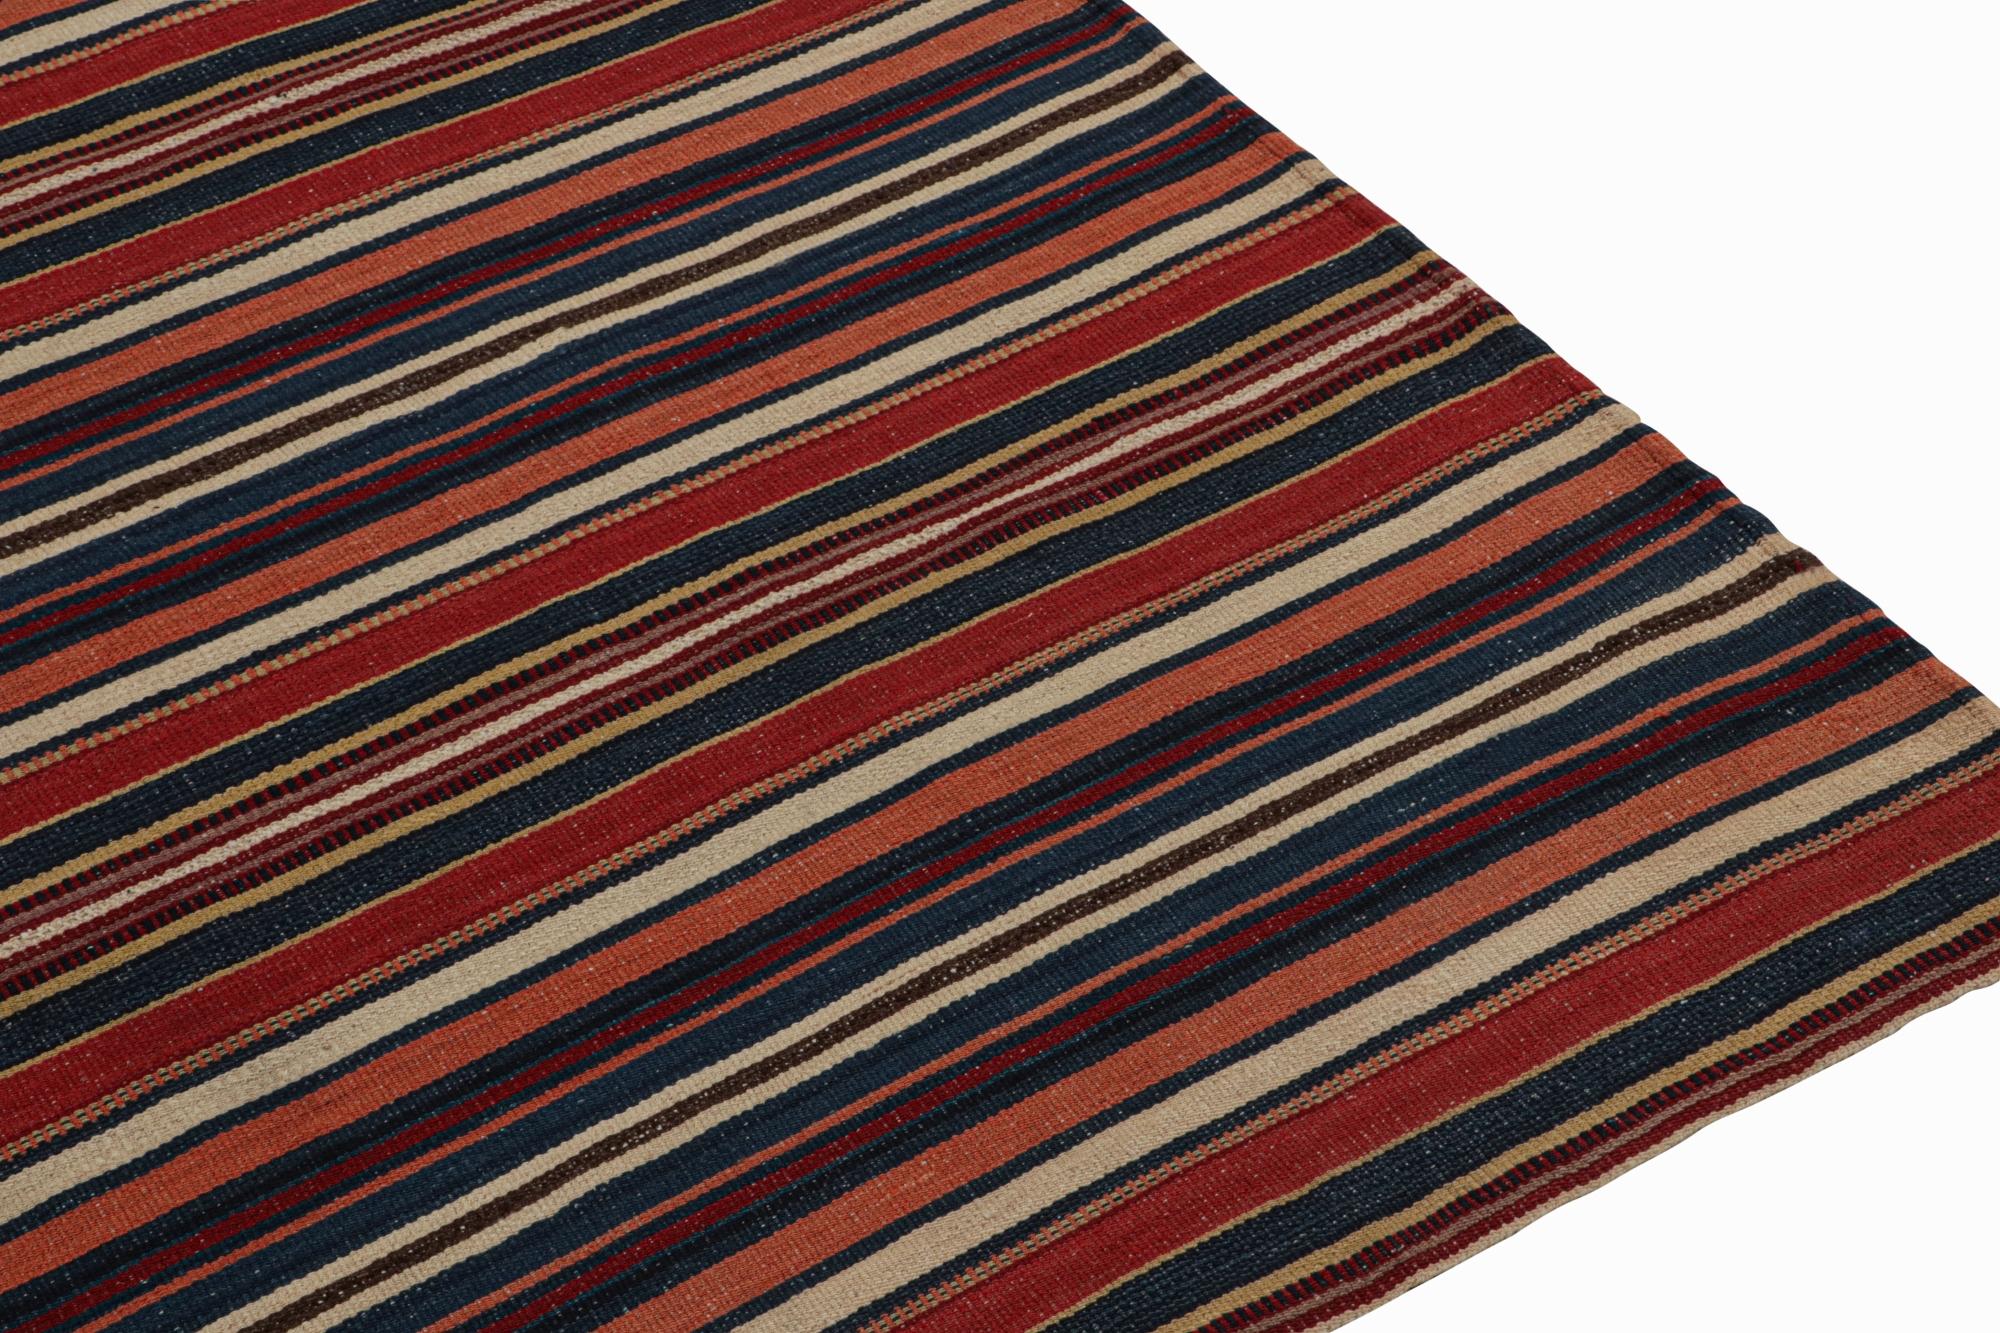 Vintage Persian Square Kilim in Red and Beige-Brown Stripes by Rug & Kilim In Good Condition For Sale In Long Island City, NY